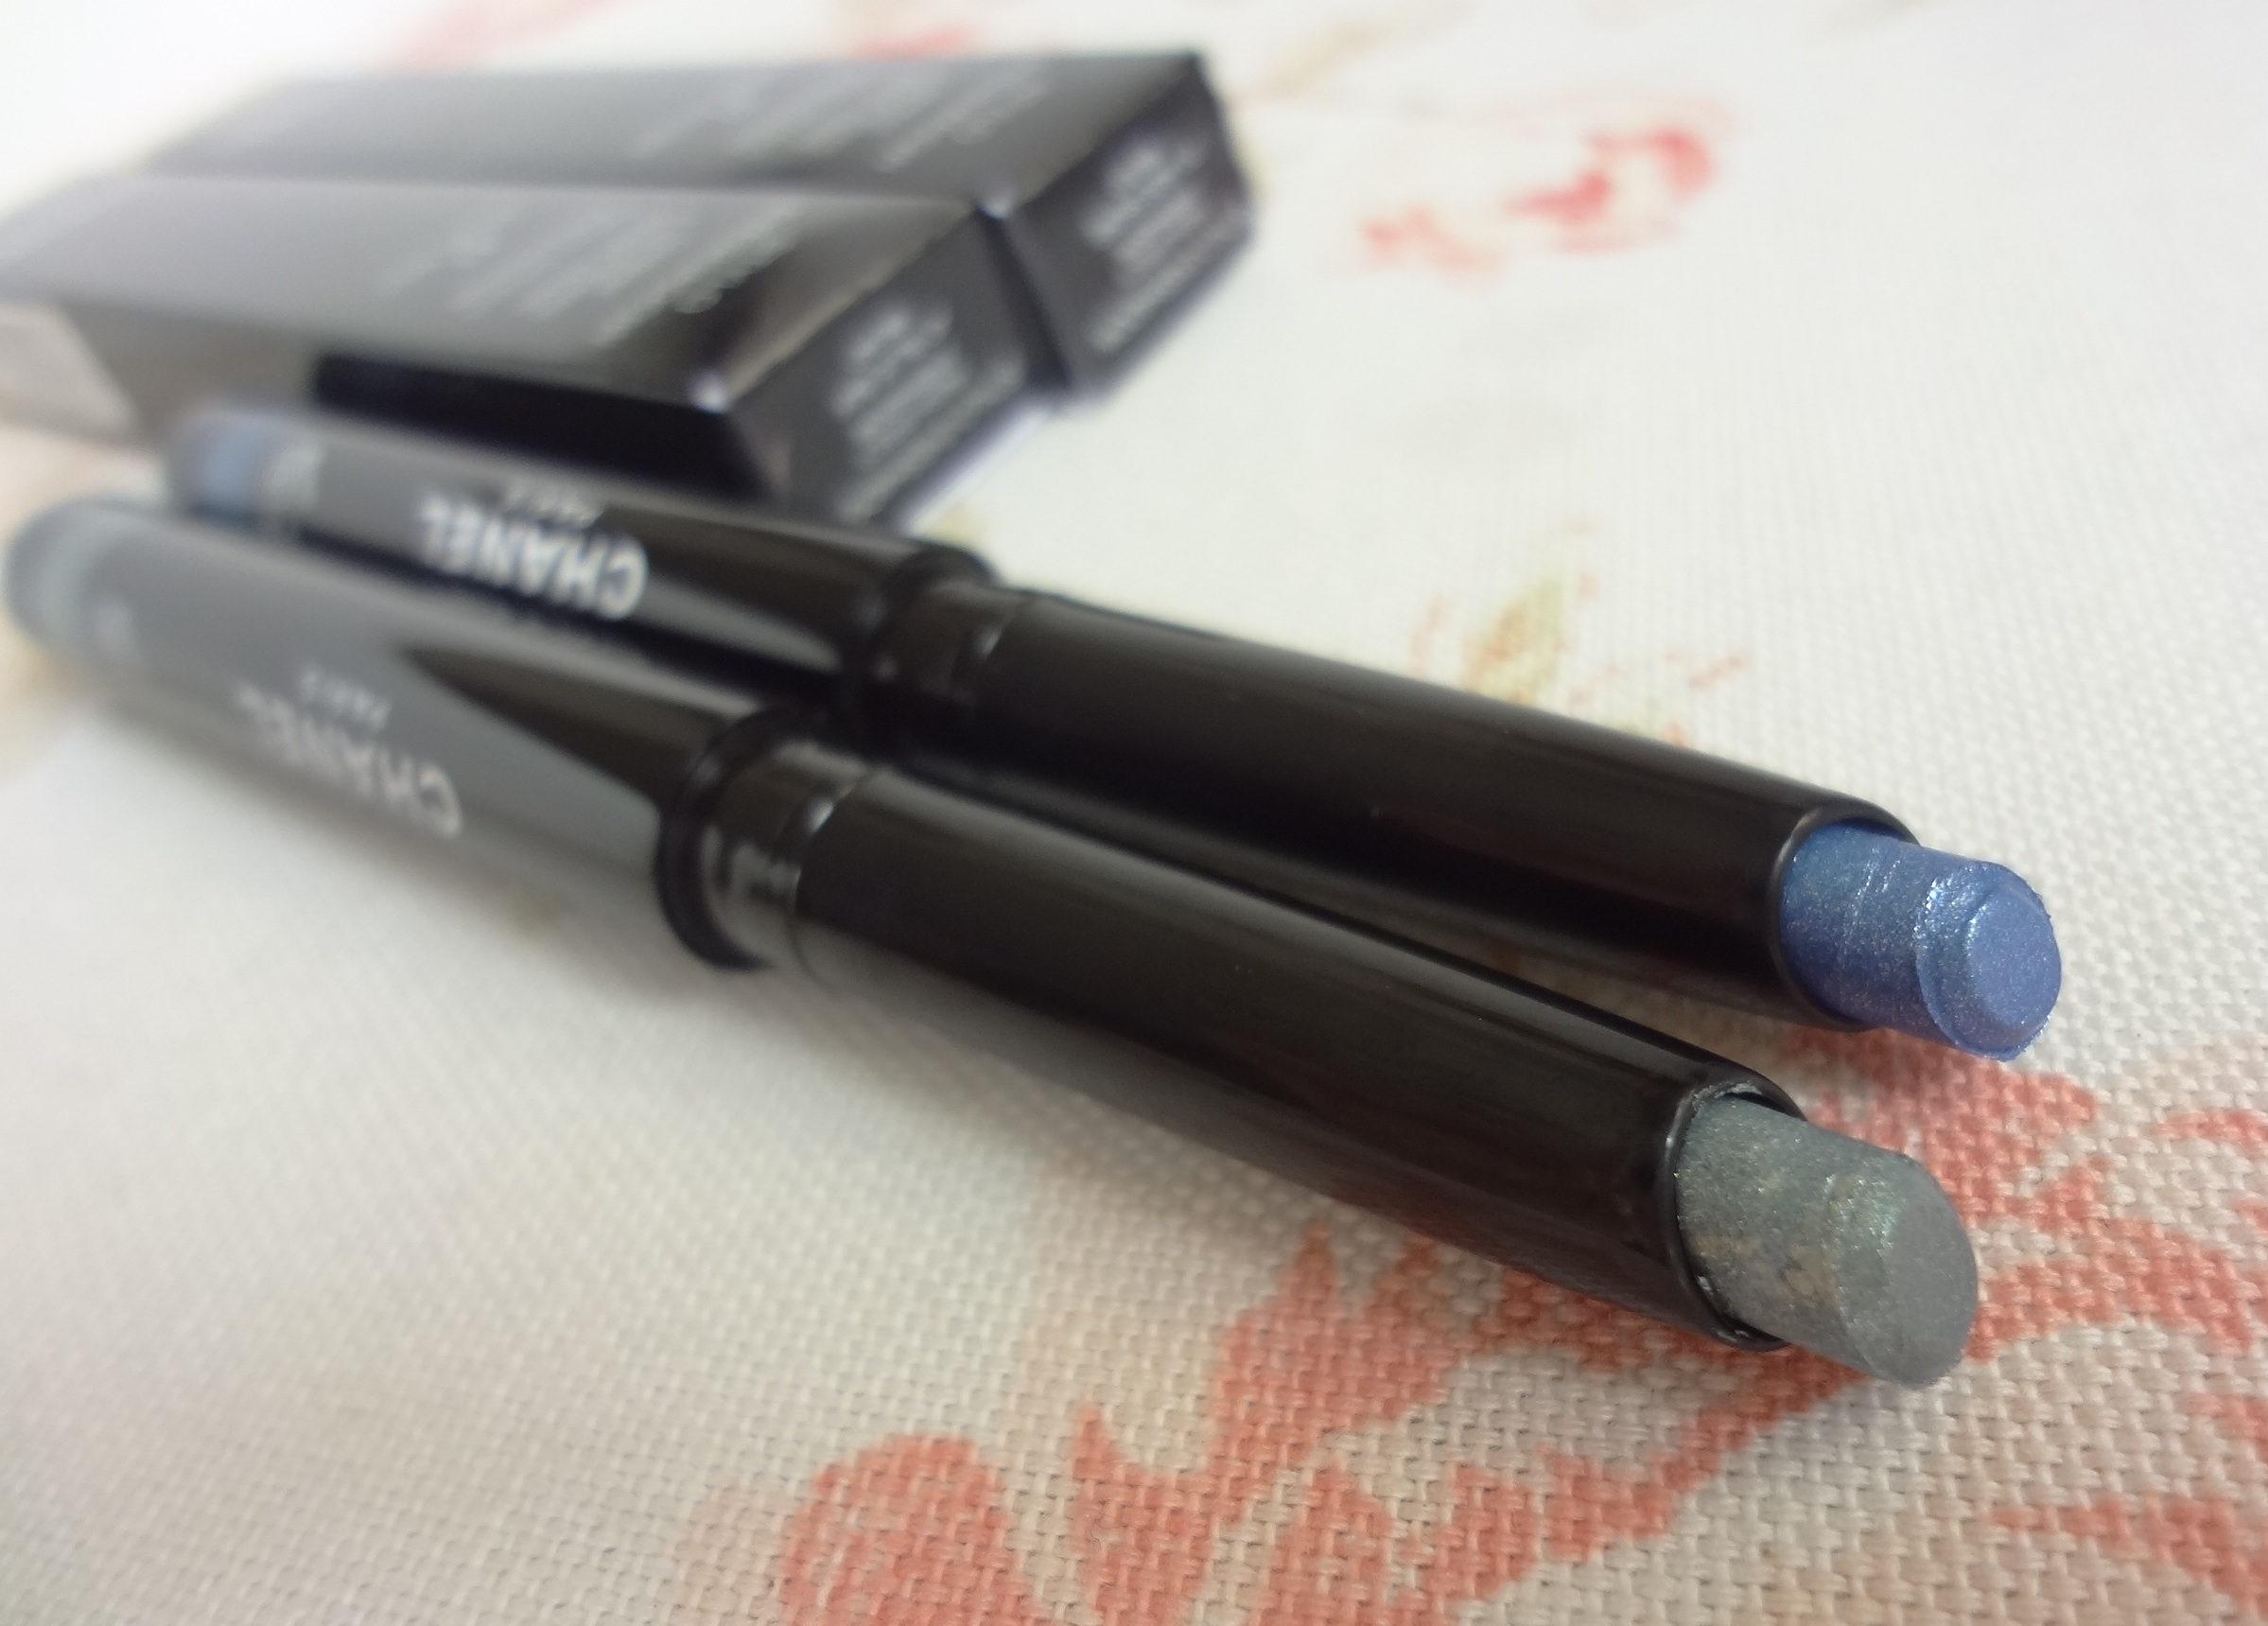 Chanel Long Lasting Eyeliner Review, Photos, Swatches (Marine, Jade)